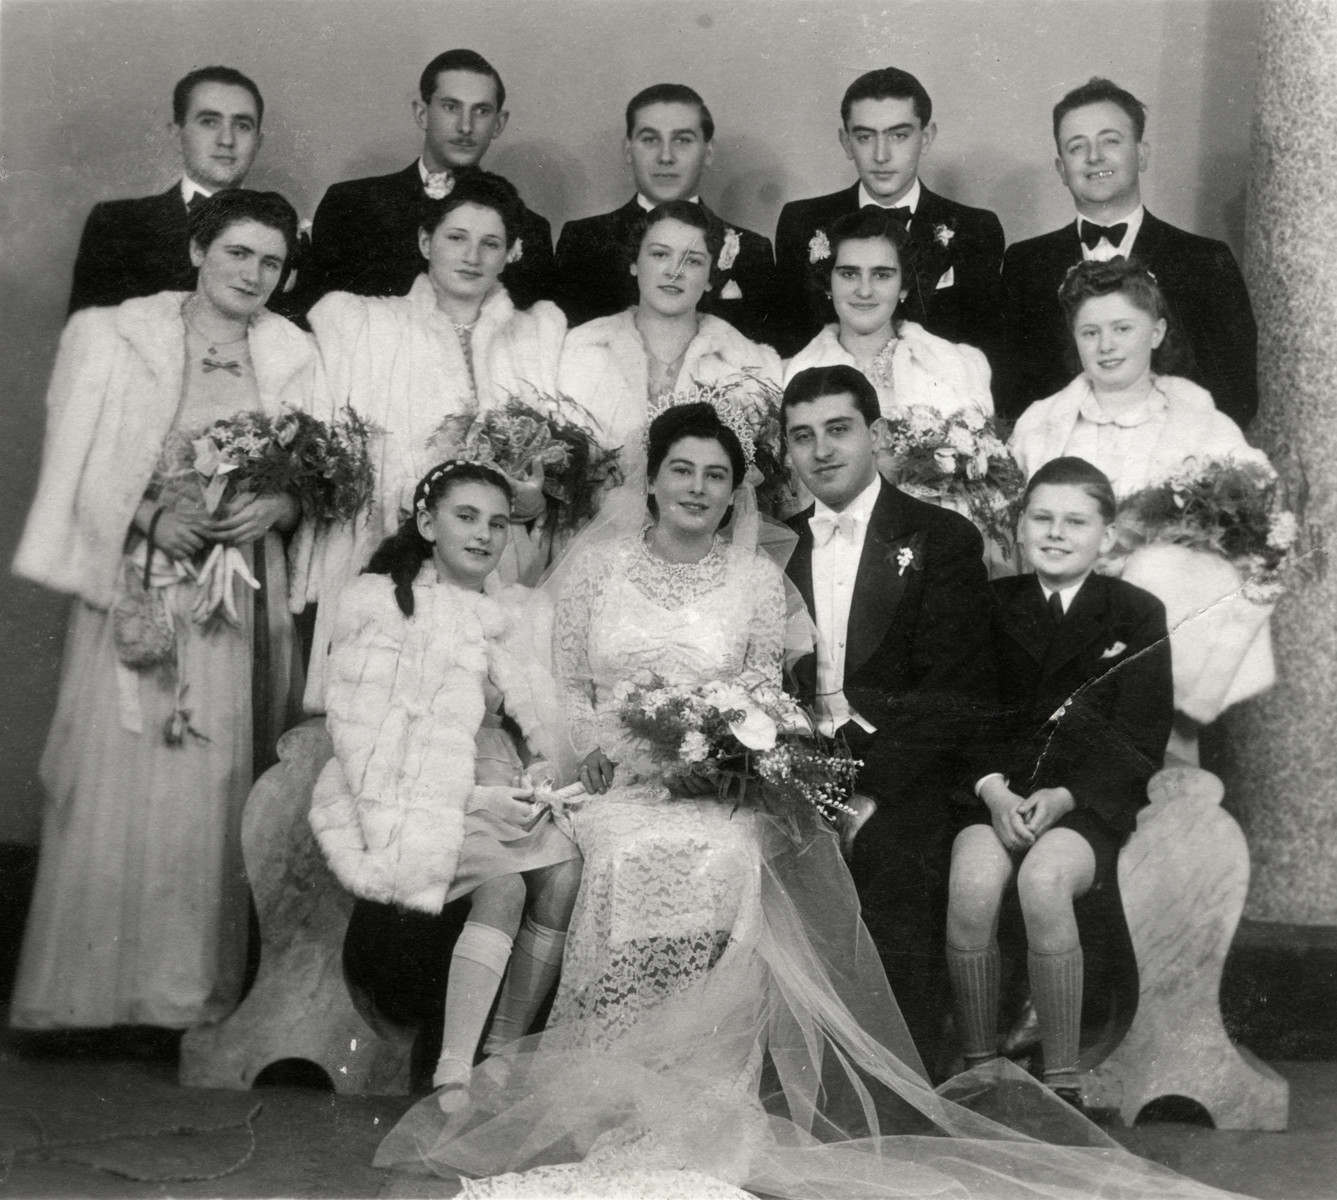 Wedding portrait of Zoltan Shiklos, cousin of the donor.

Zoltan Shiklos perished in the Holocaust. Agnes Somlo is pictured in the fur coat.